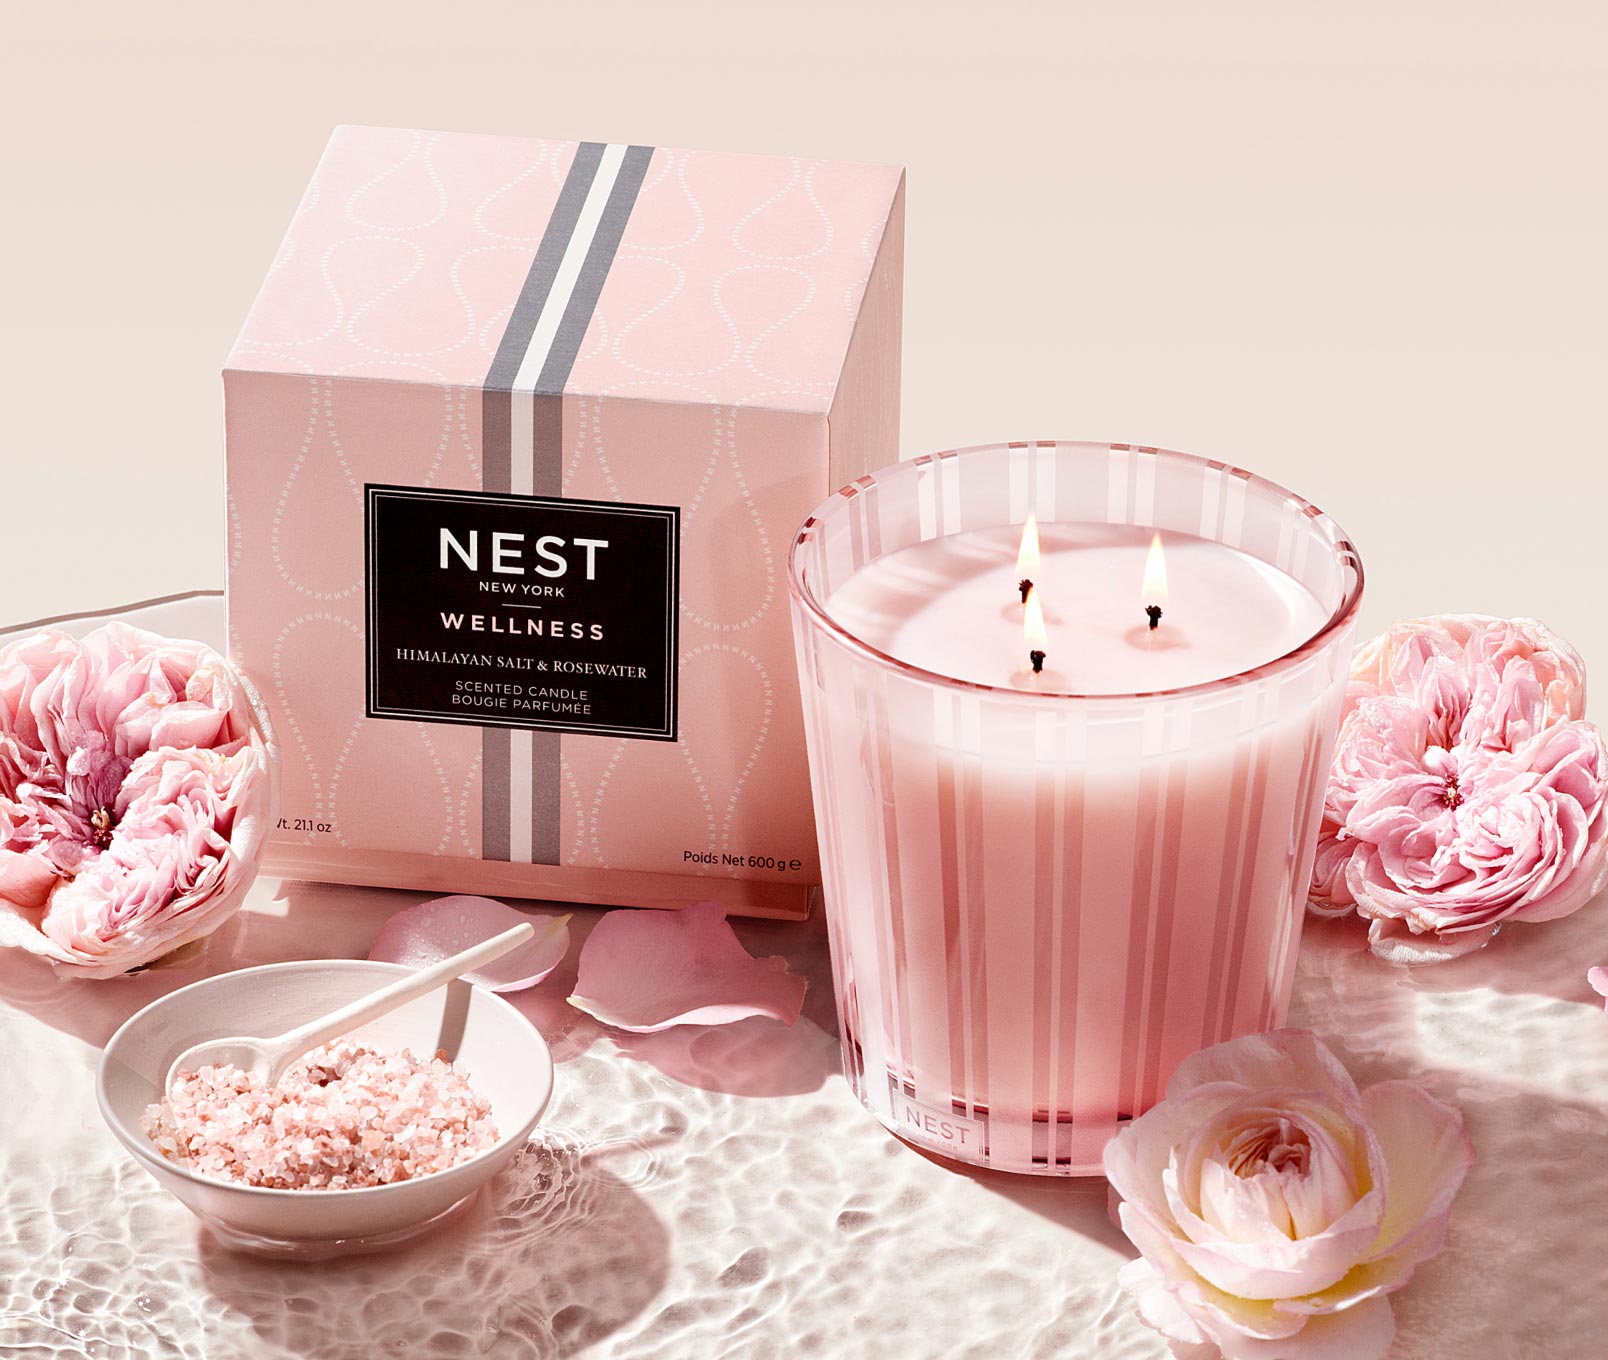 Sleep Well Wellbeing Ritual Home Candle & Refill – Scentered